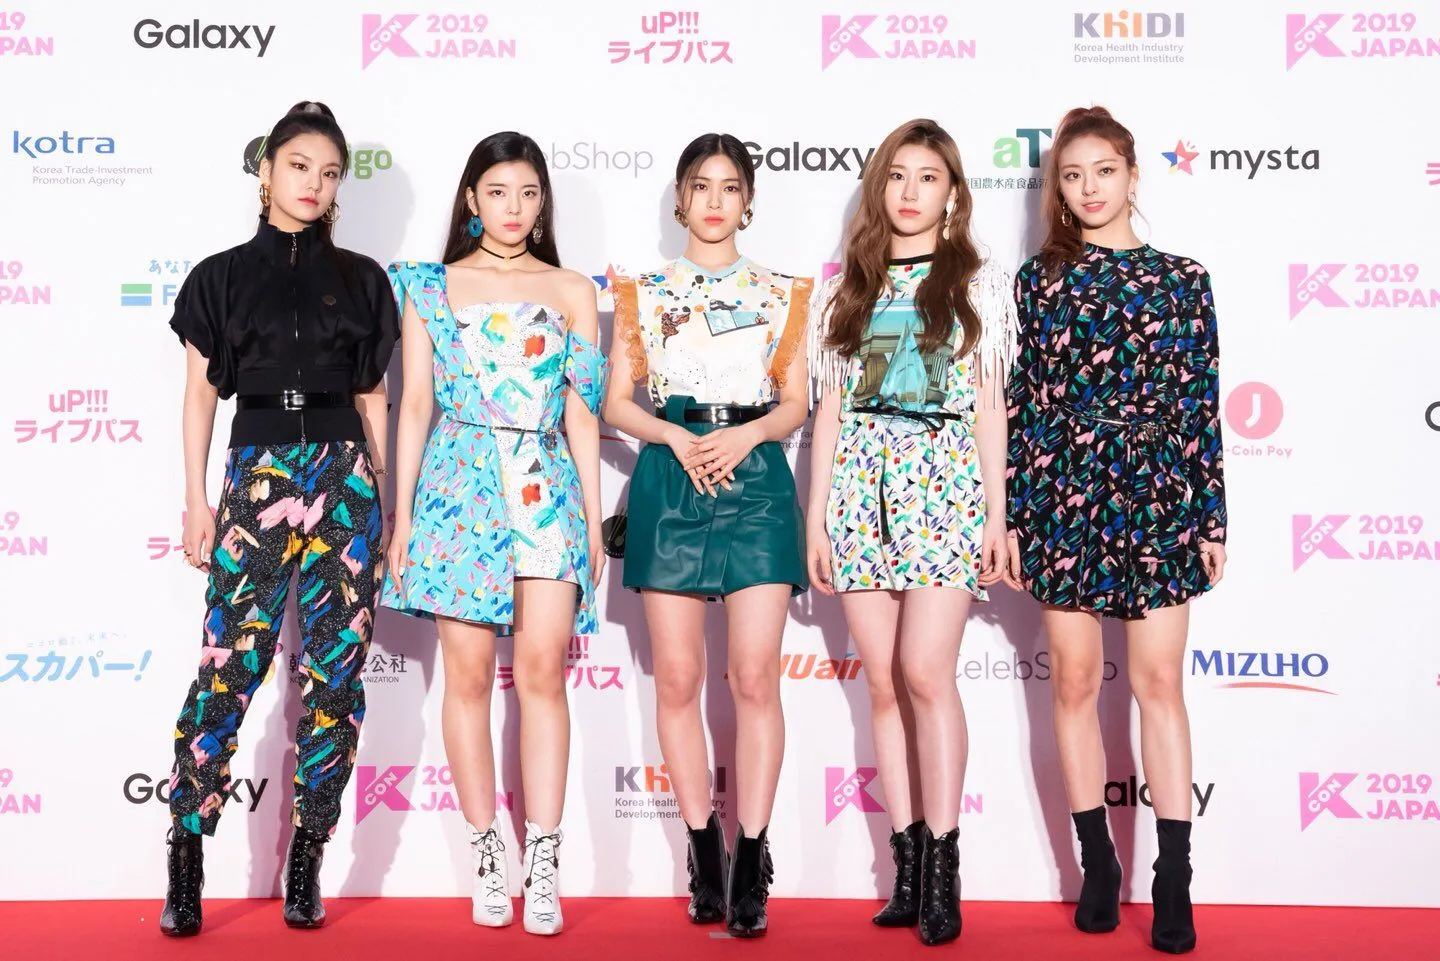 ITZY KCON 2019 Japan Red Carpet | kpopping